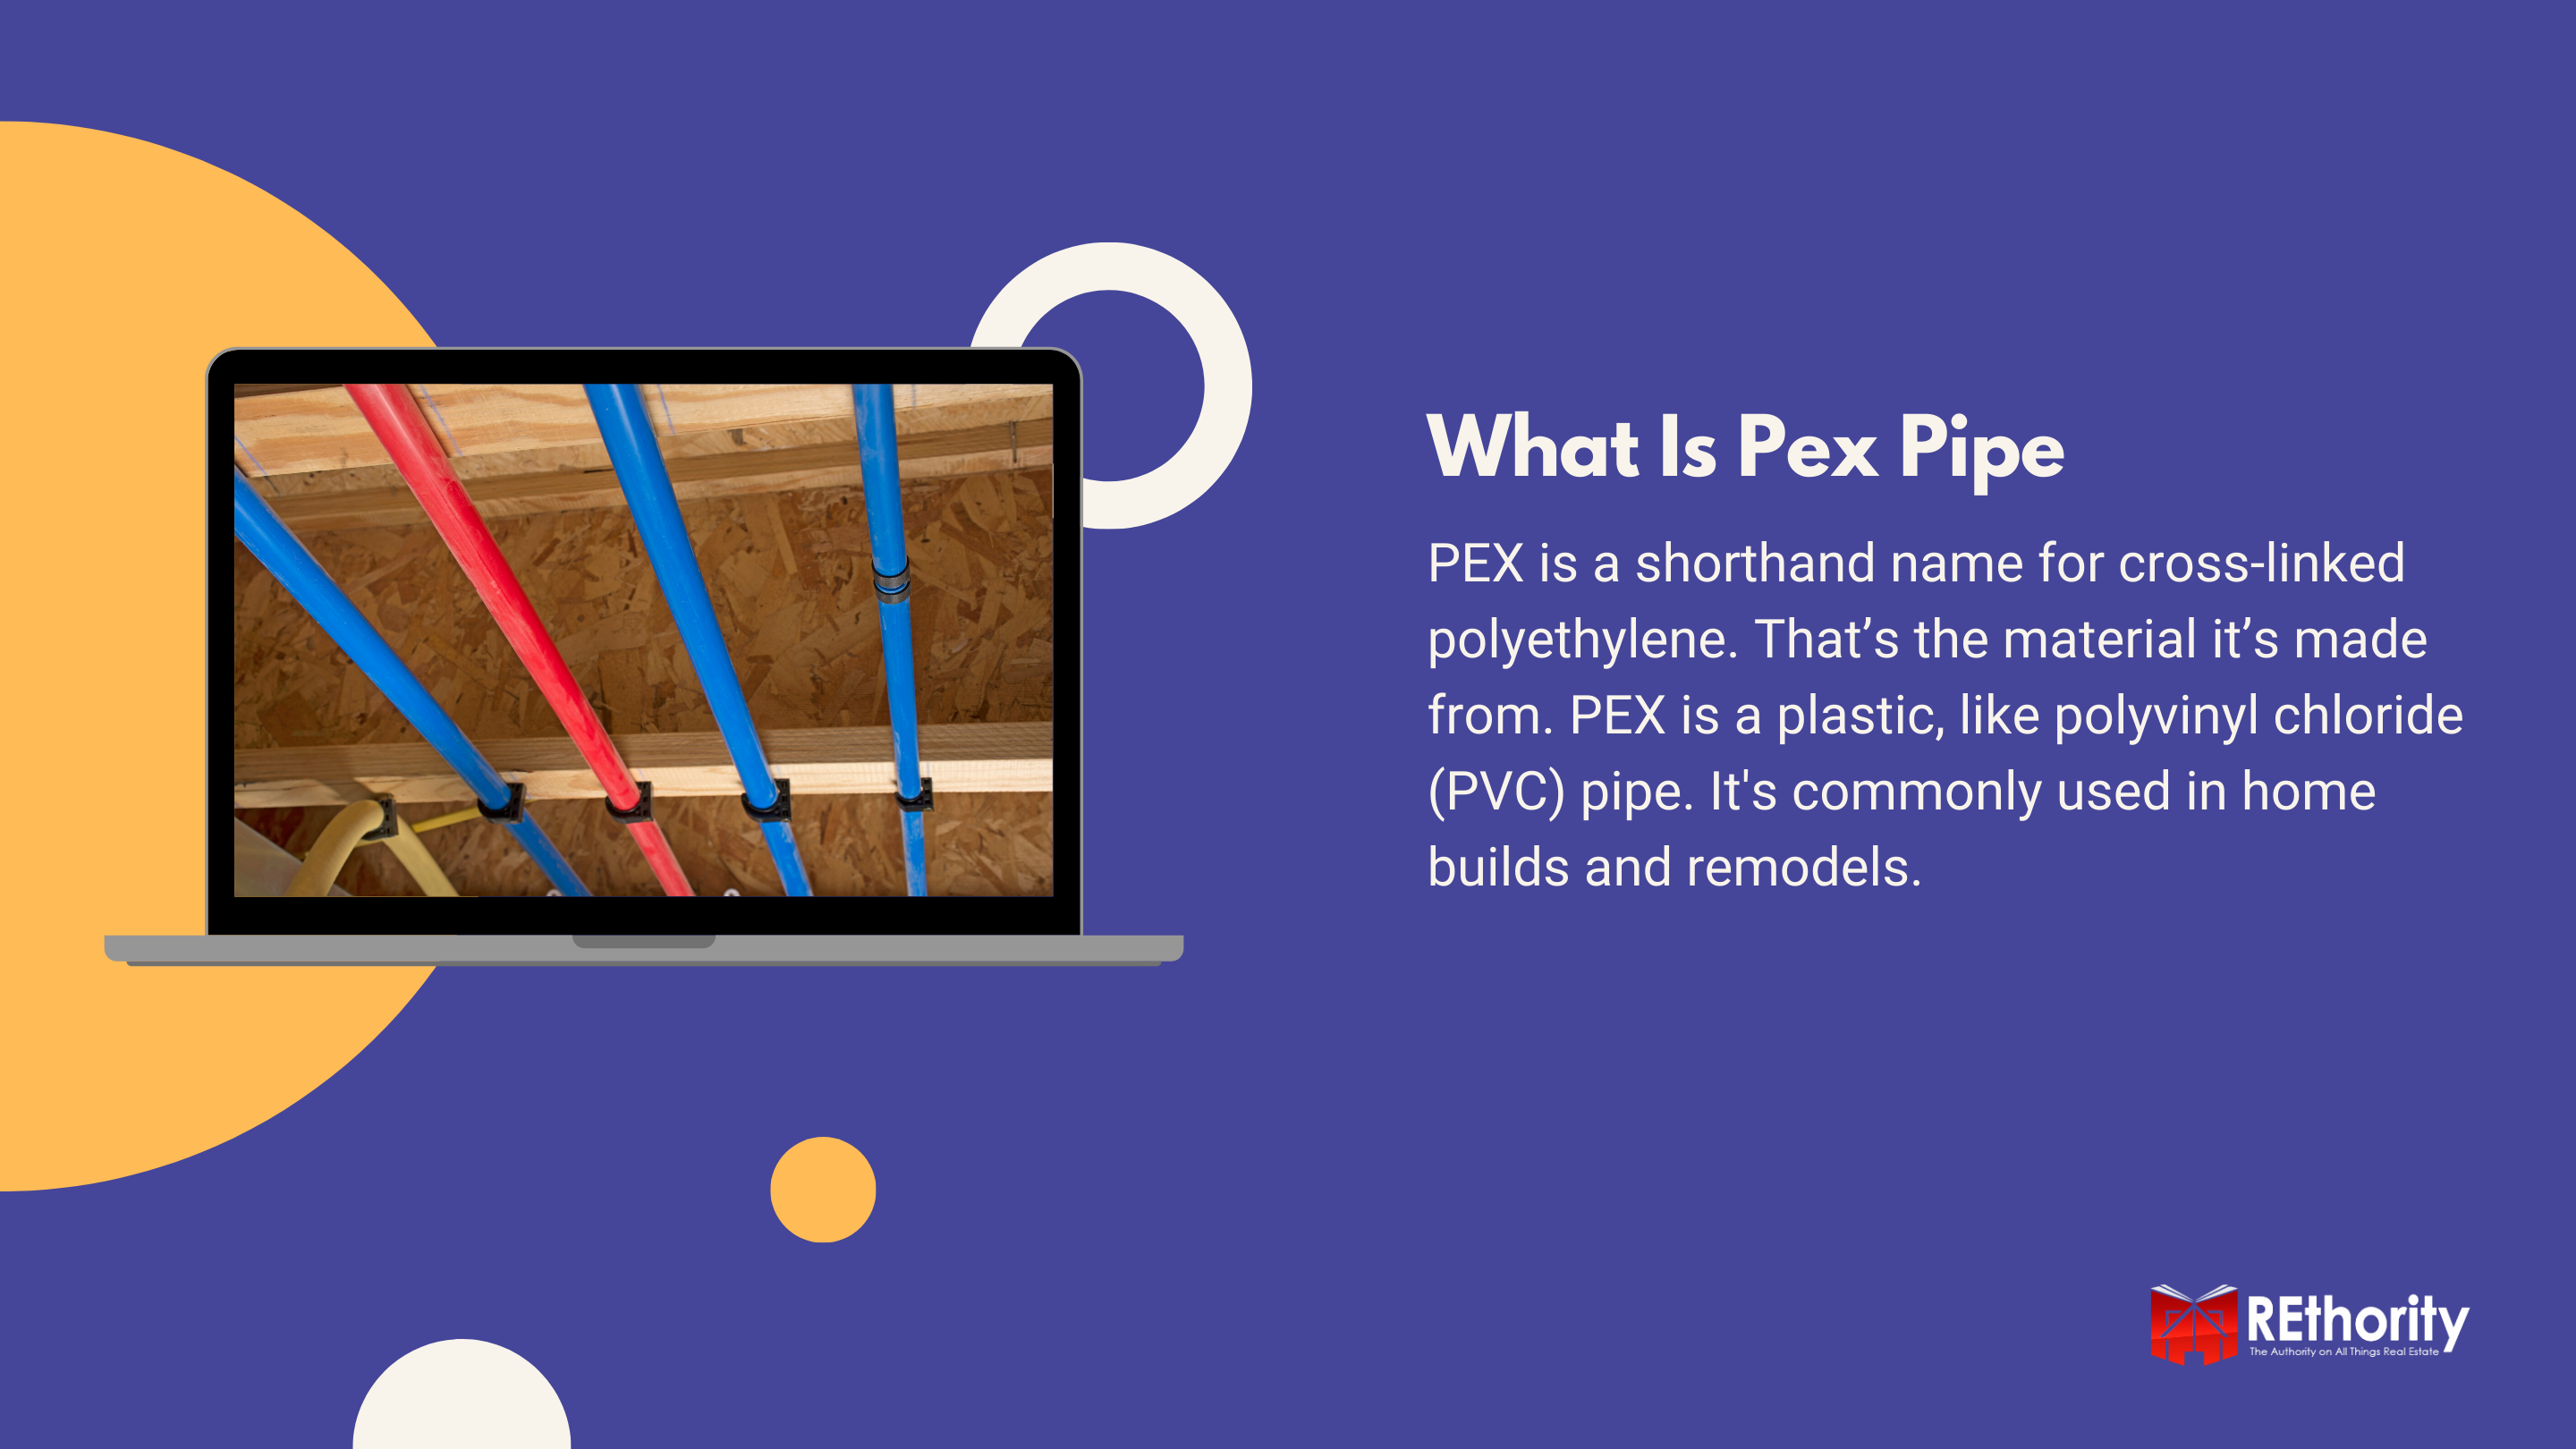 What Is Pex Pipe graphic explaining the pros and cons of each